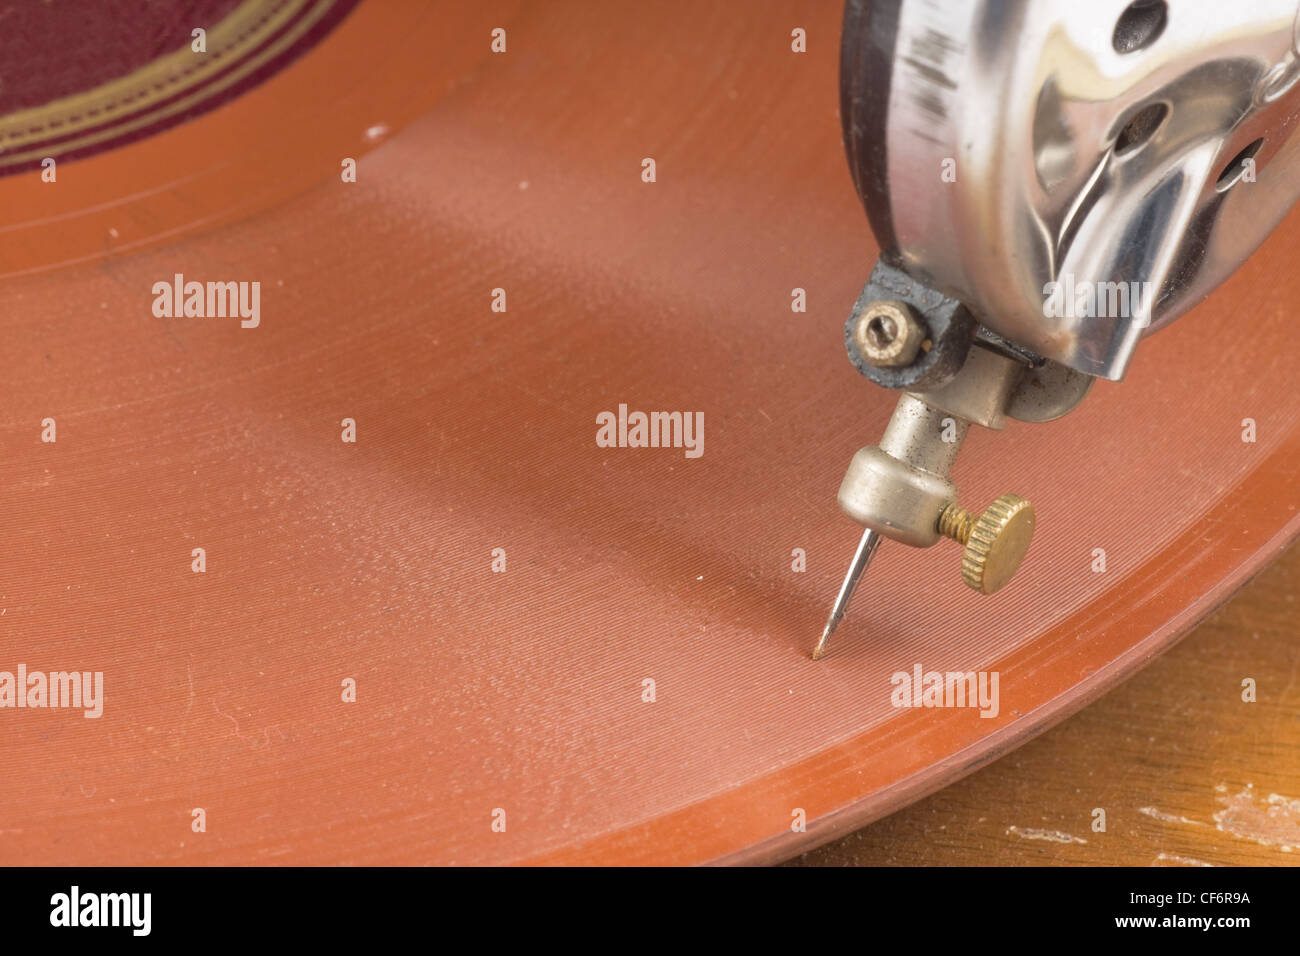 Old fashioned record player needle on 78 record. Stock Photo